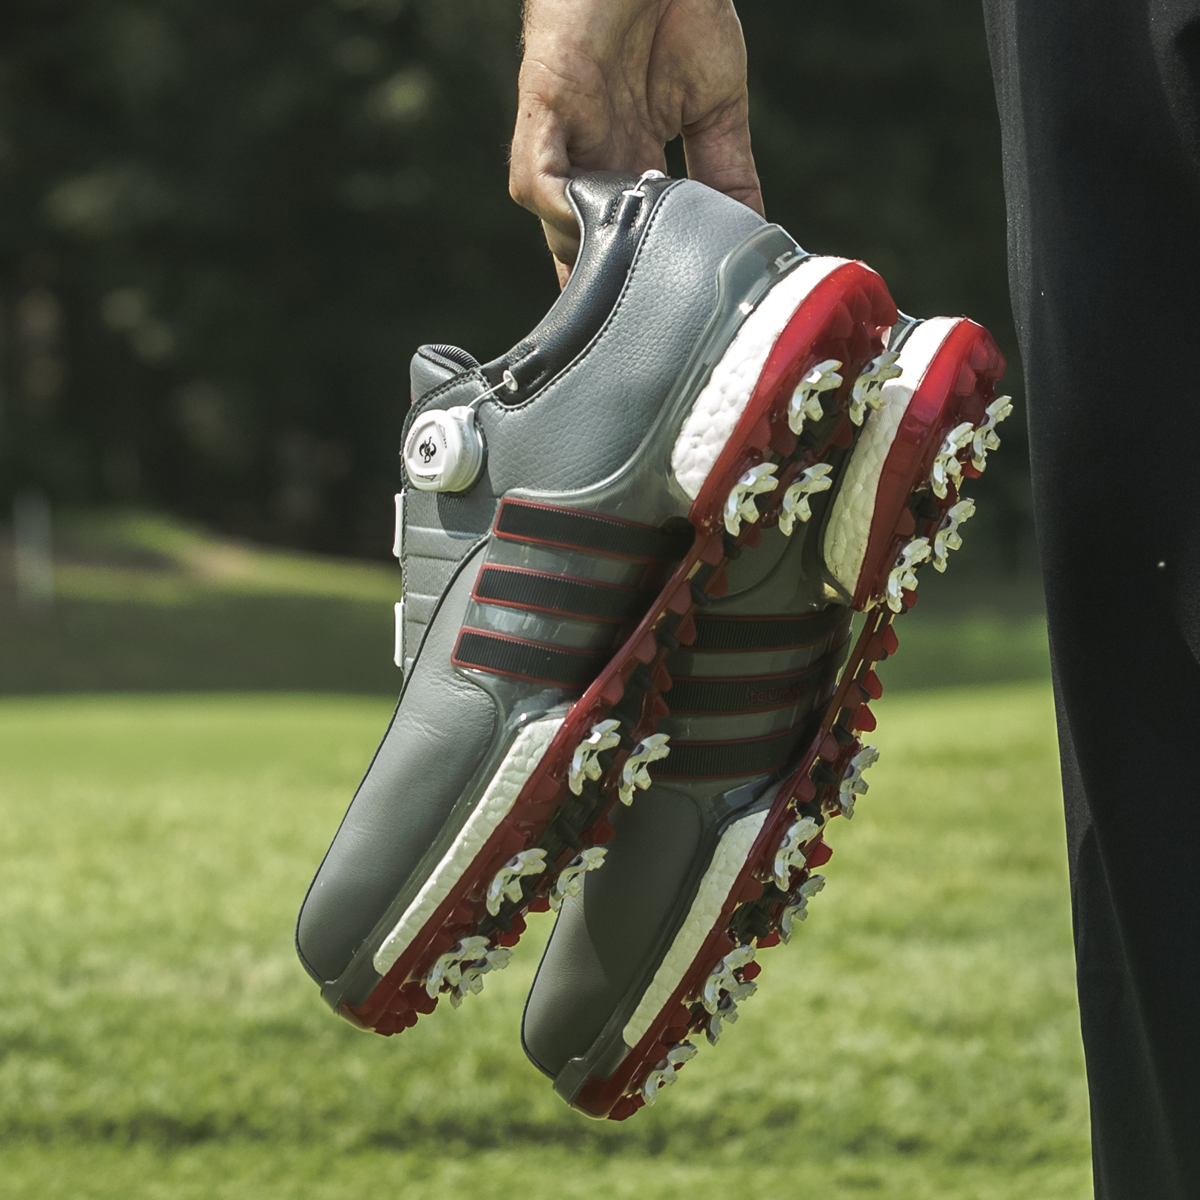 adidas Golf expands Tour360 family with Knit and EQT Boa models